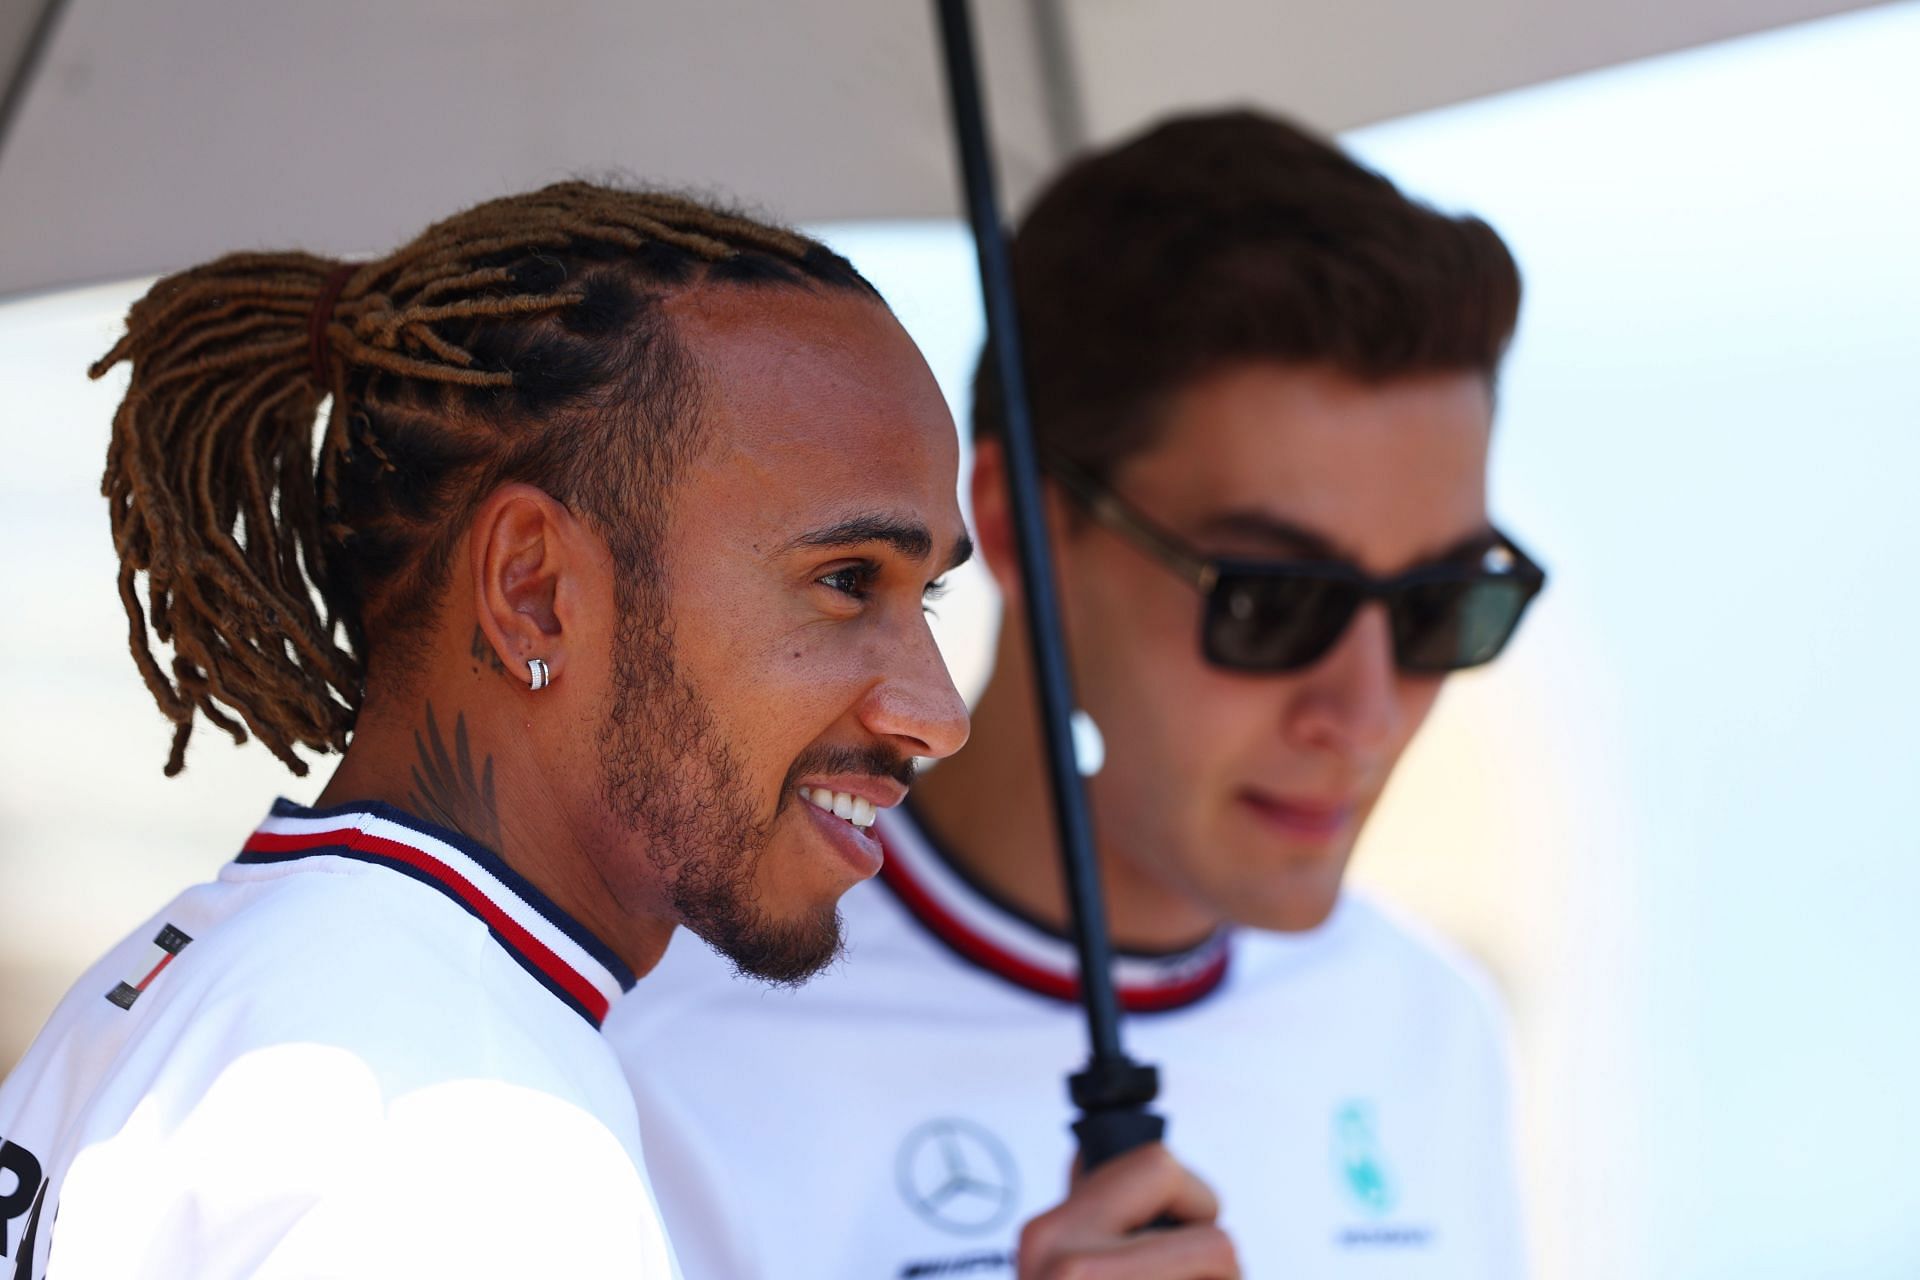 The Mercedes drivers might be the center of attention at the 2022 F1 Canadian GP